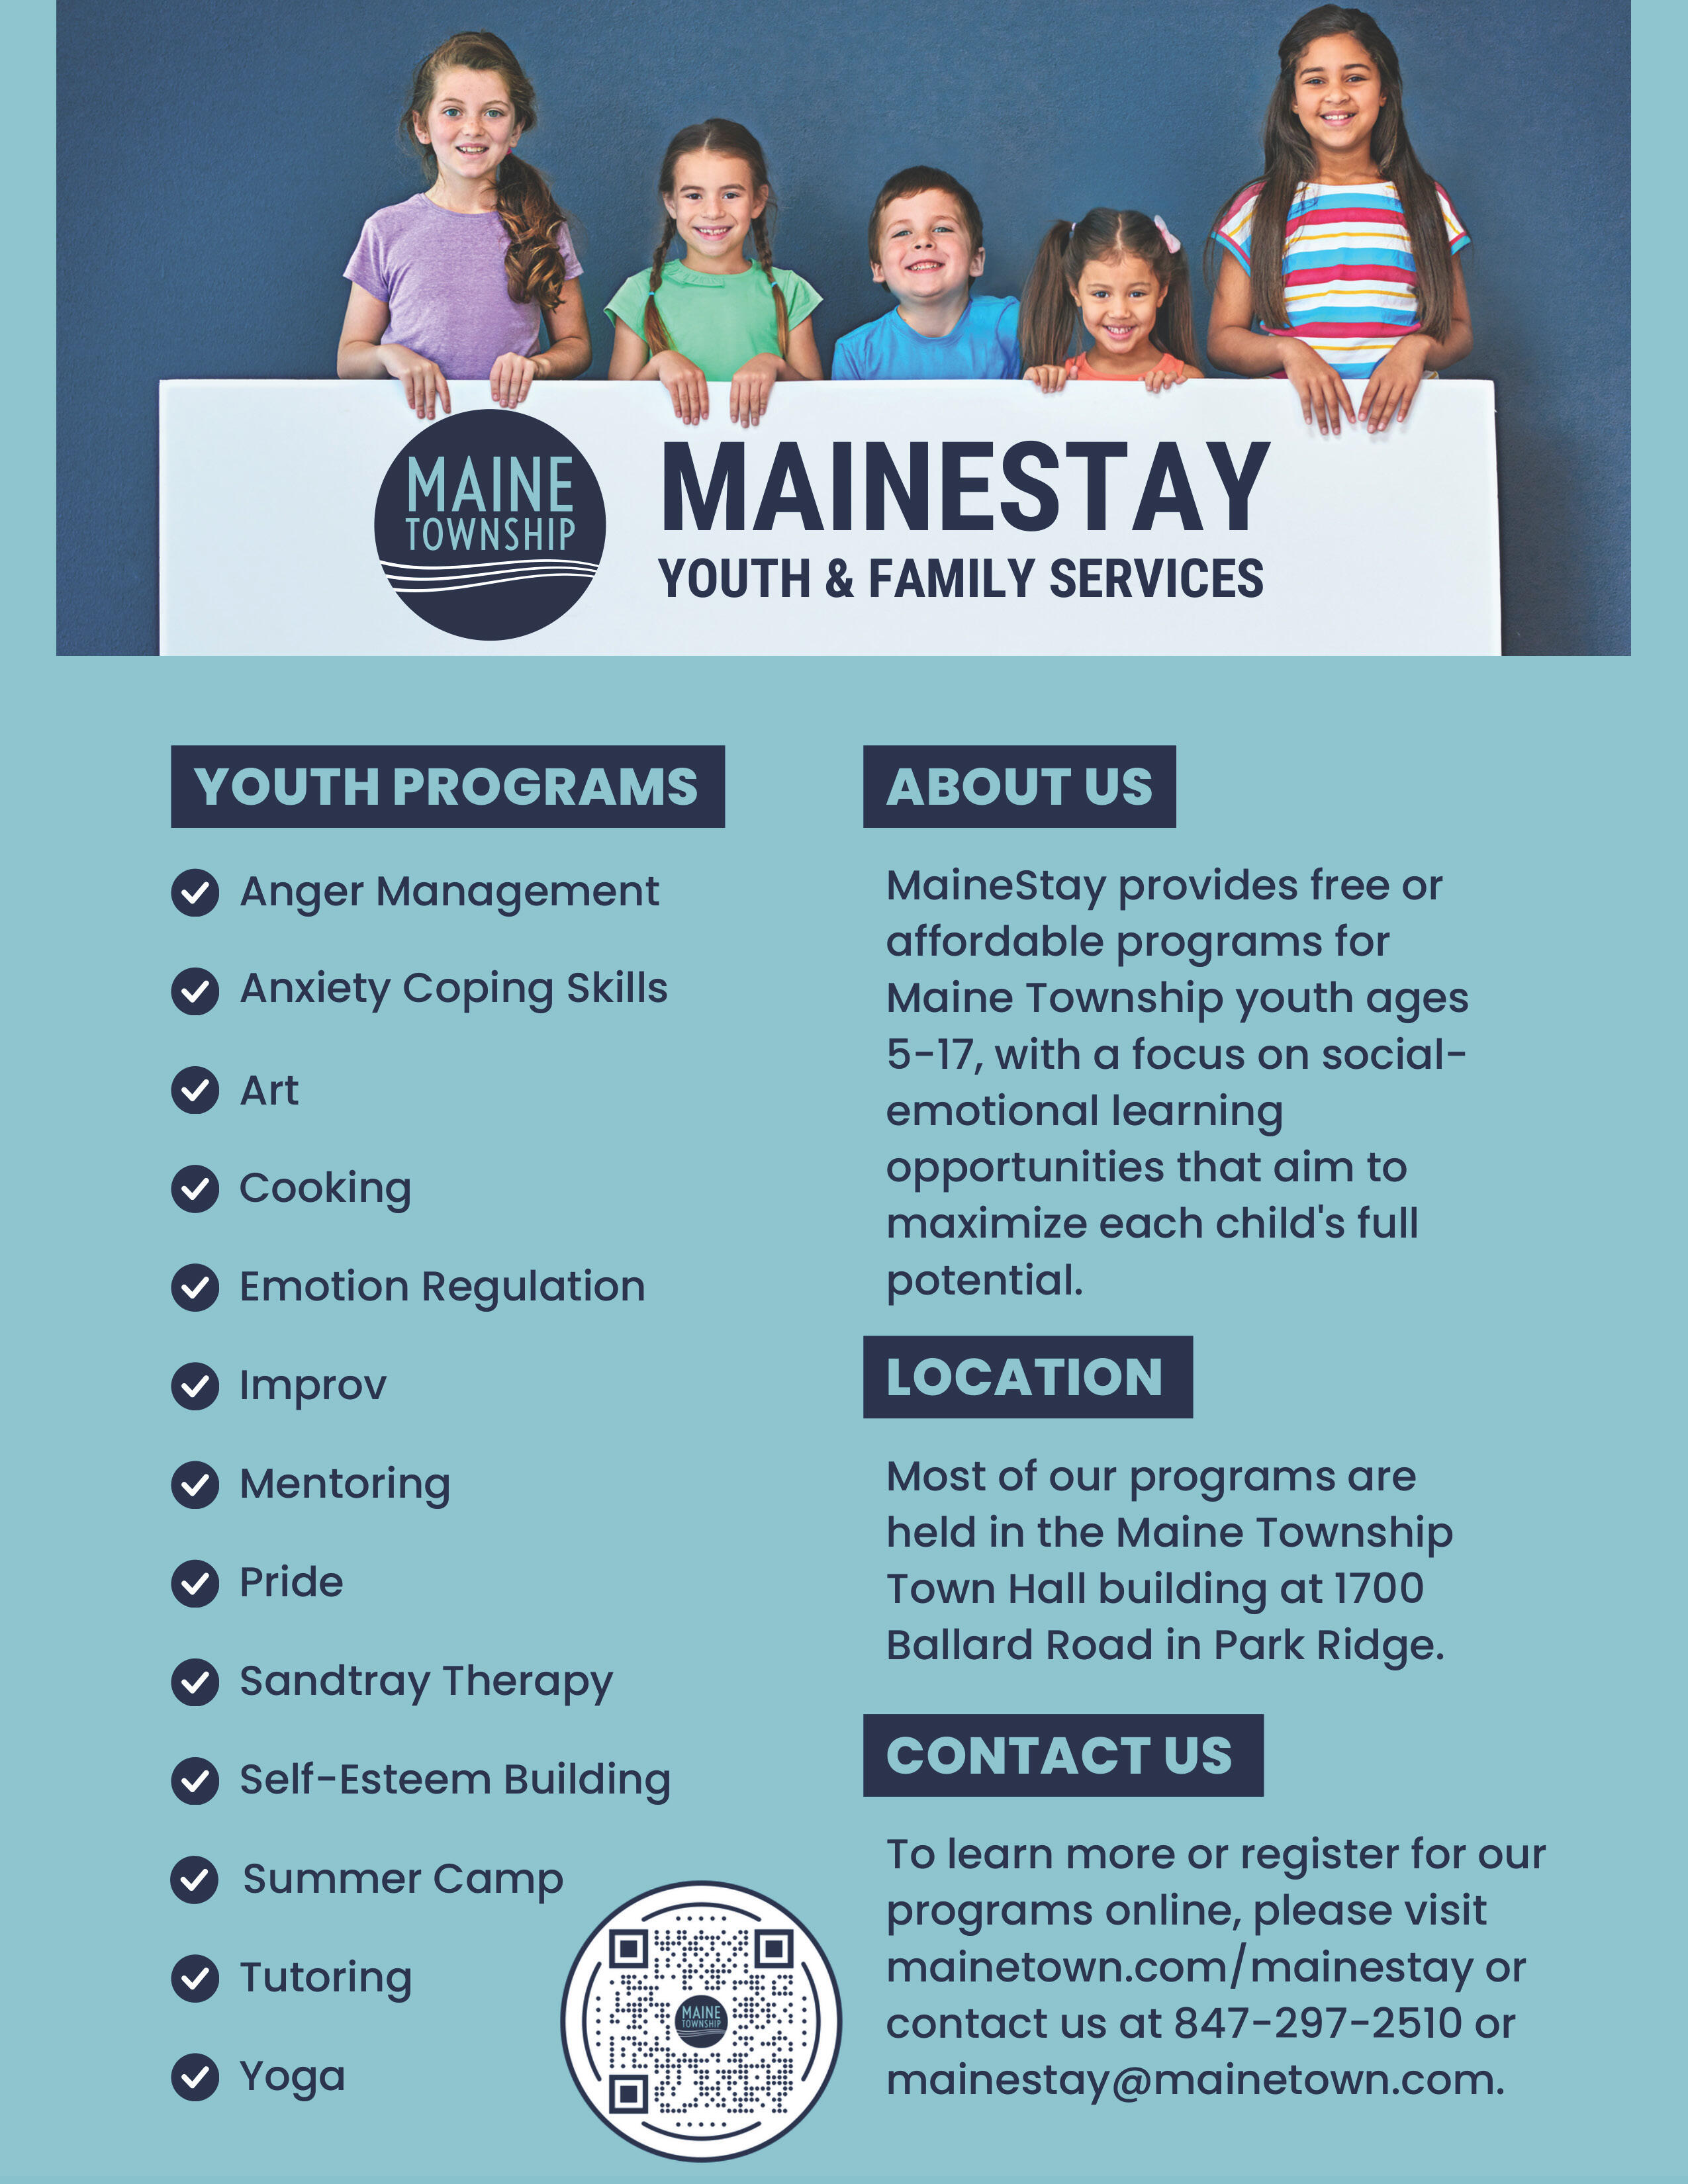 Mainestay Youth and Family Services information